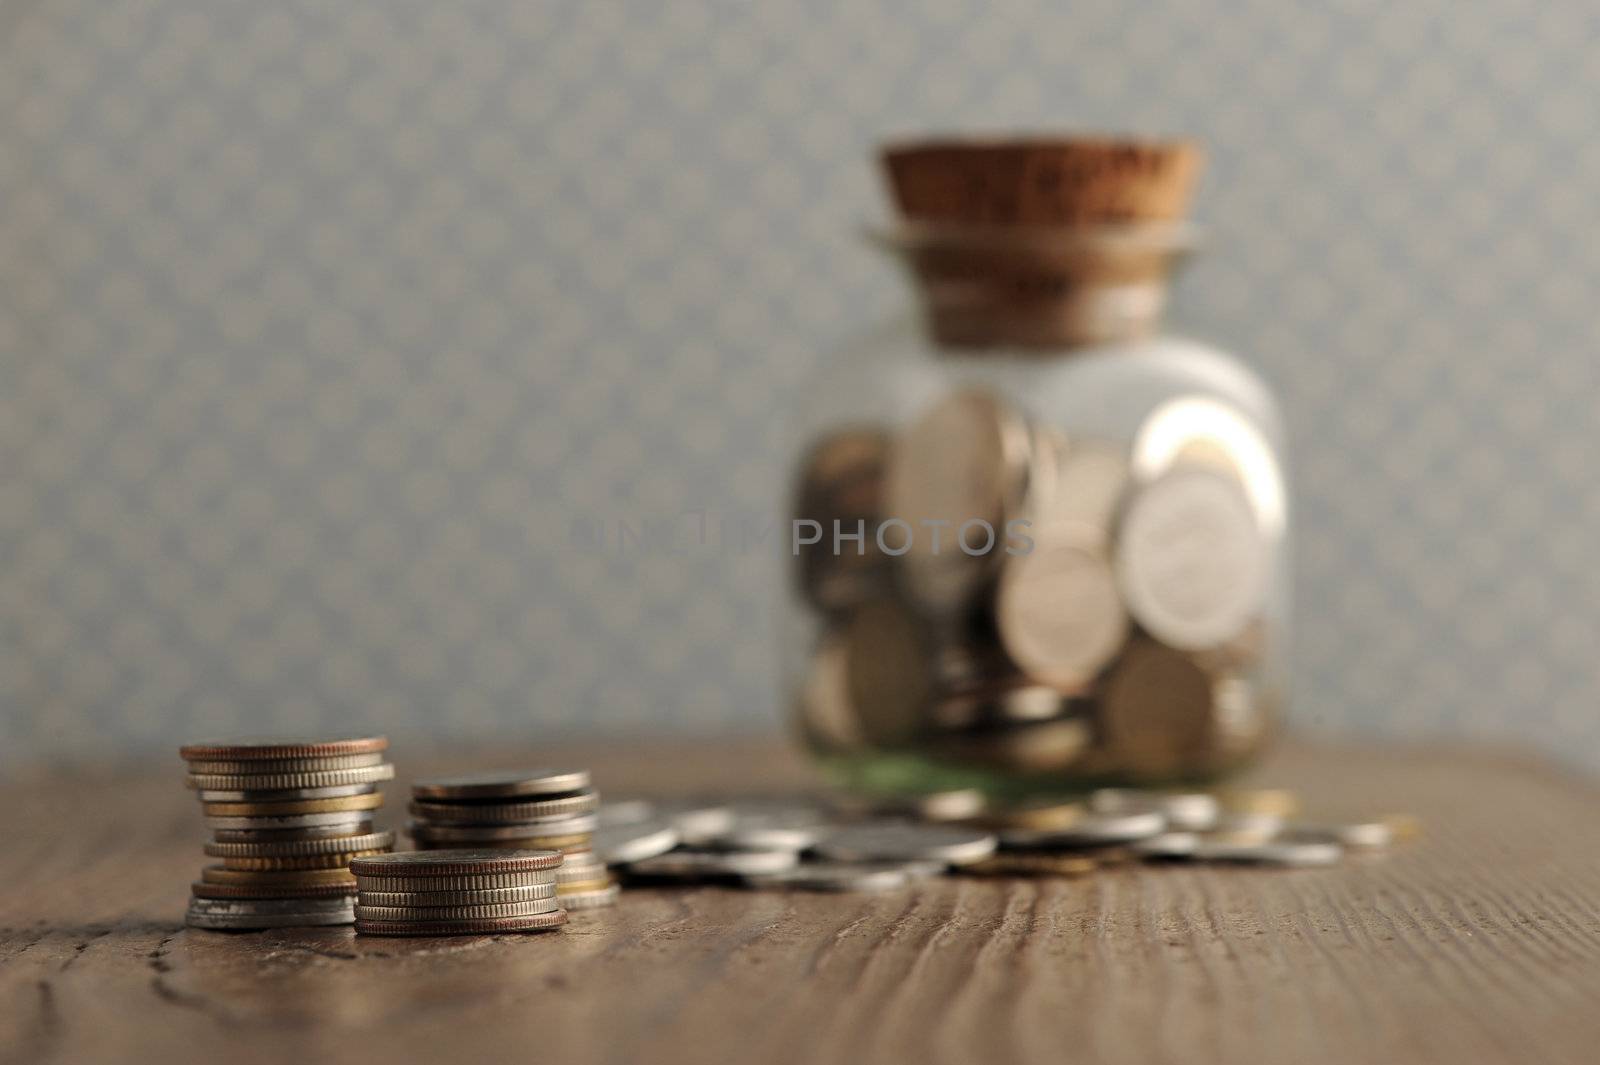 old coins on the wooden table, shallow dof by stokkete